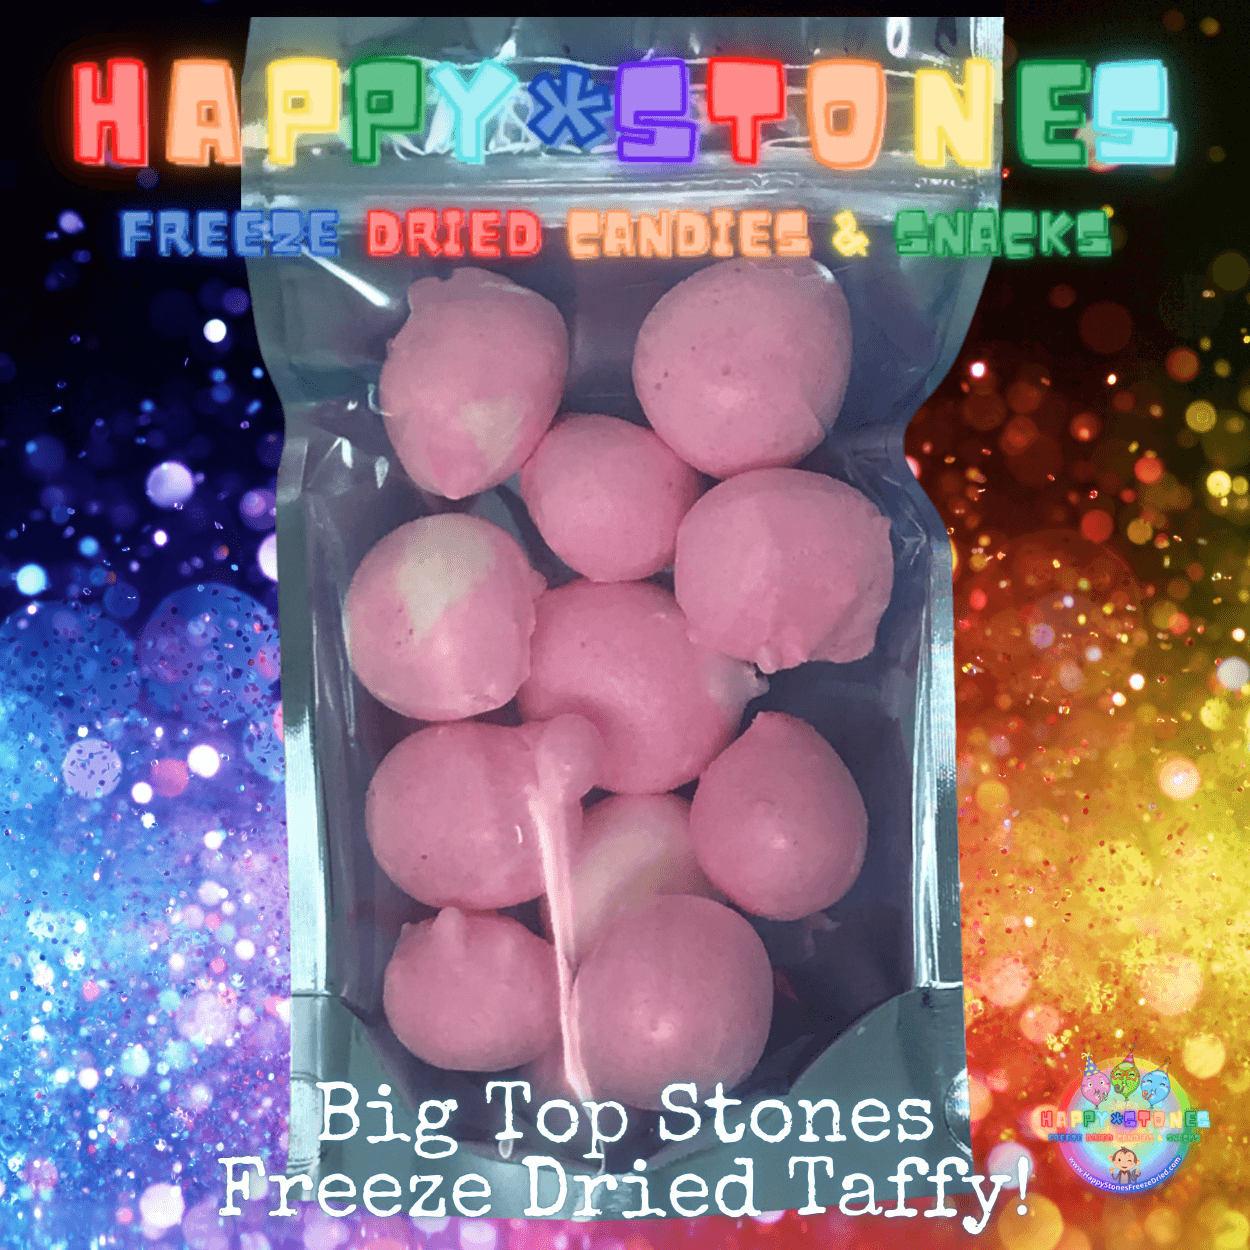 Freeze Dried Salt Water Taffy Candy You Can Eat With Braces - Strawberry & Cream Flavors Big Top Stones